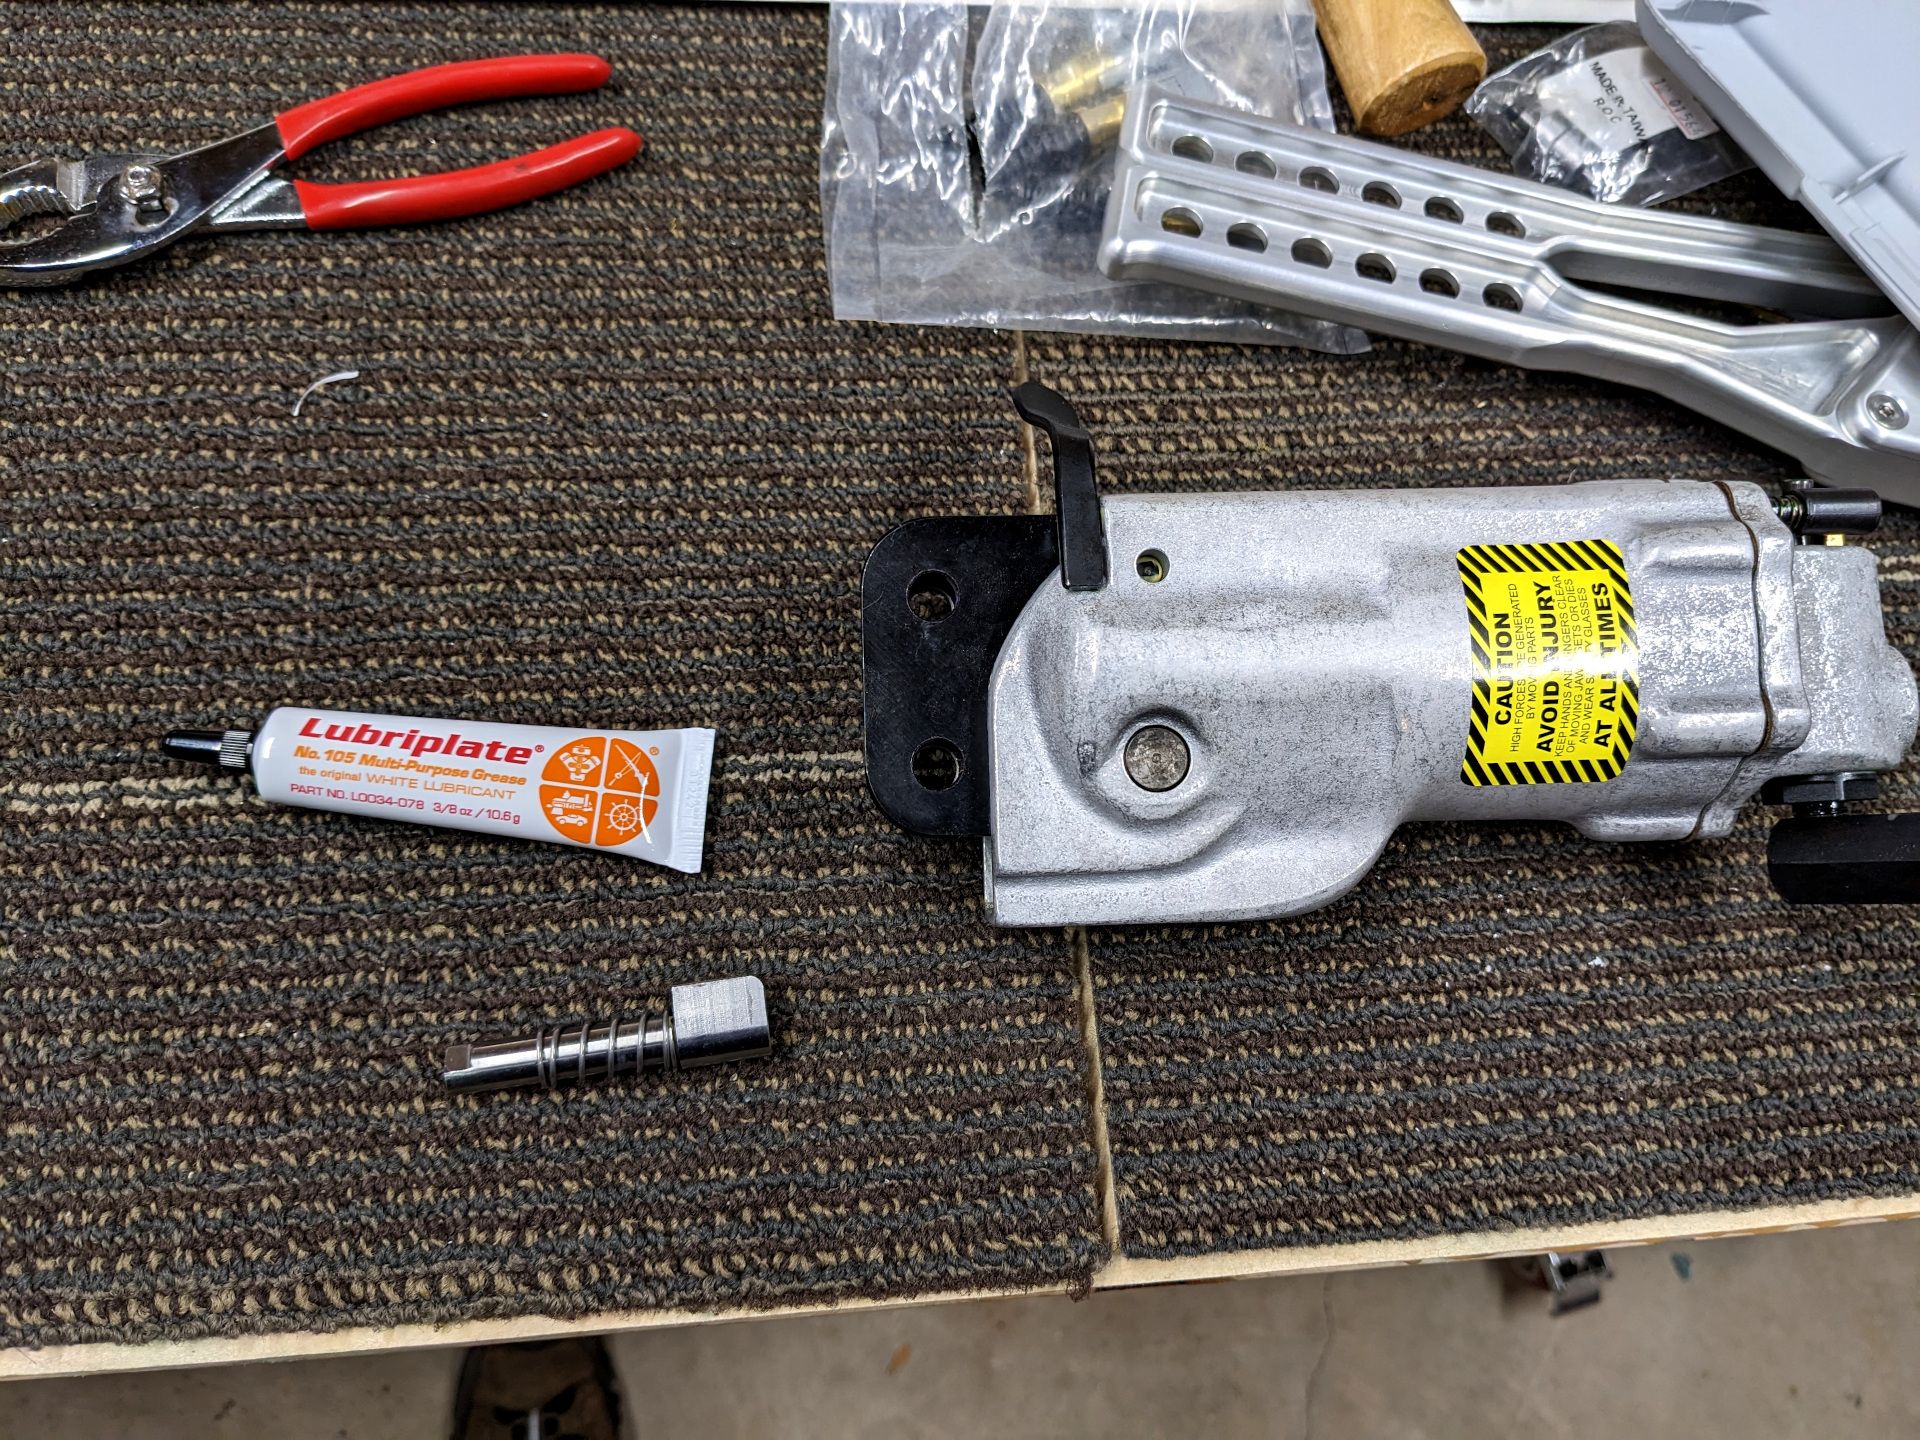 A pneumatic squeezer tool, the ram, and some grease